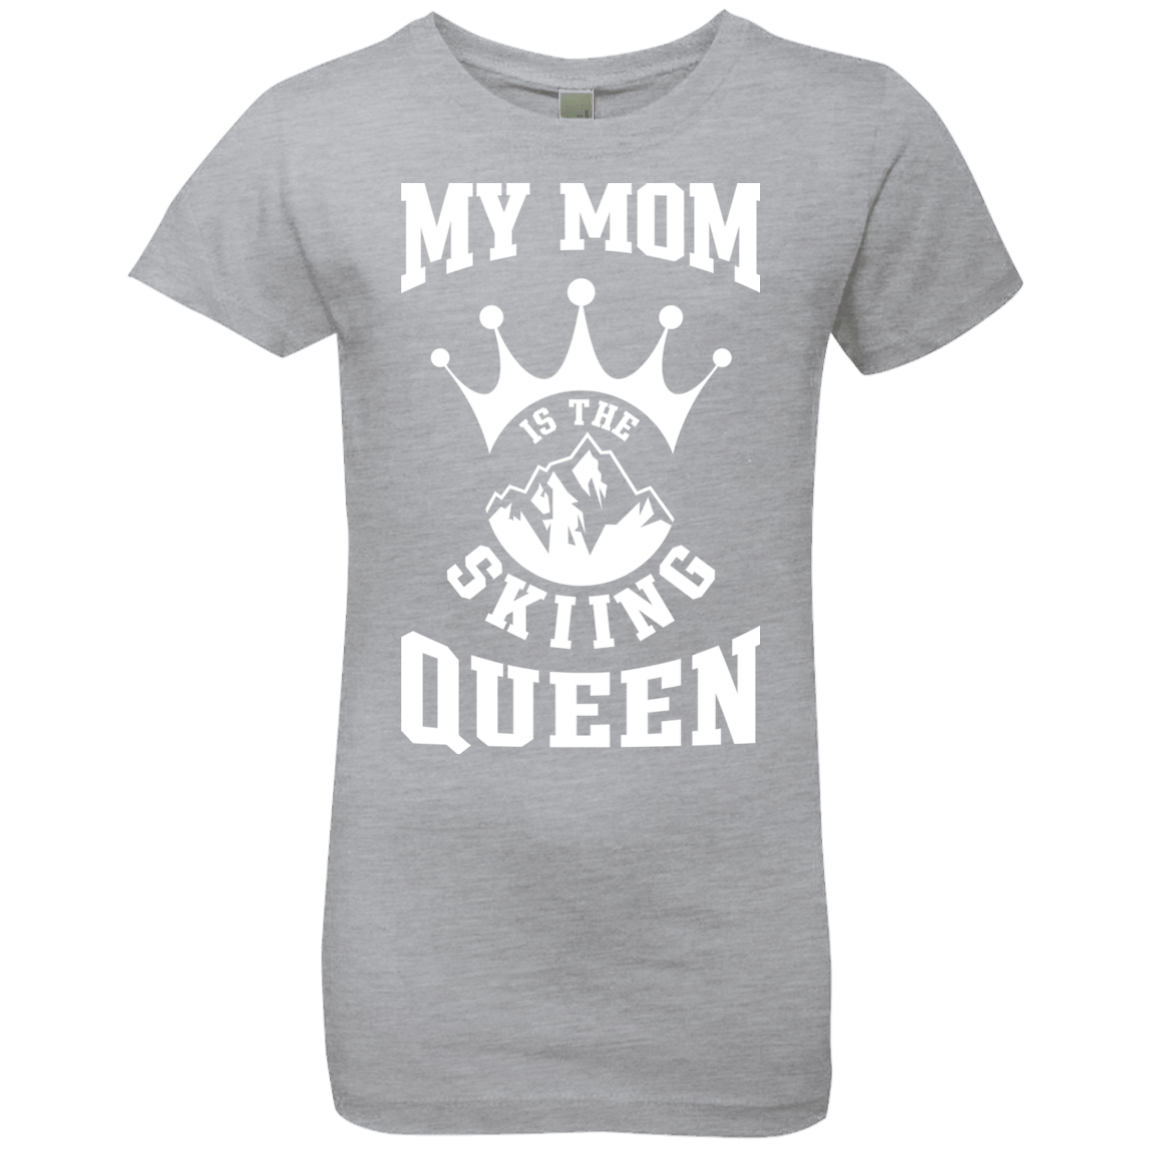 My Mom Is The Skiing Queen White Youth Next Level Girls' Princess T-Shirt - Powderaddicts